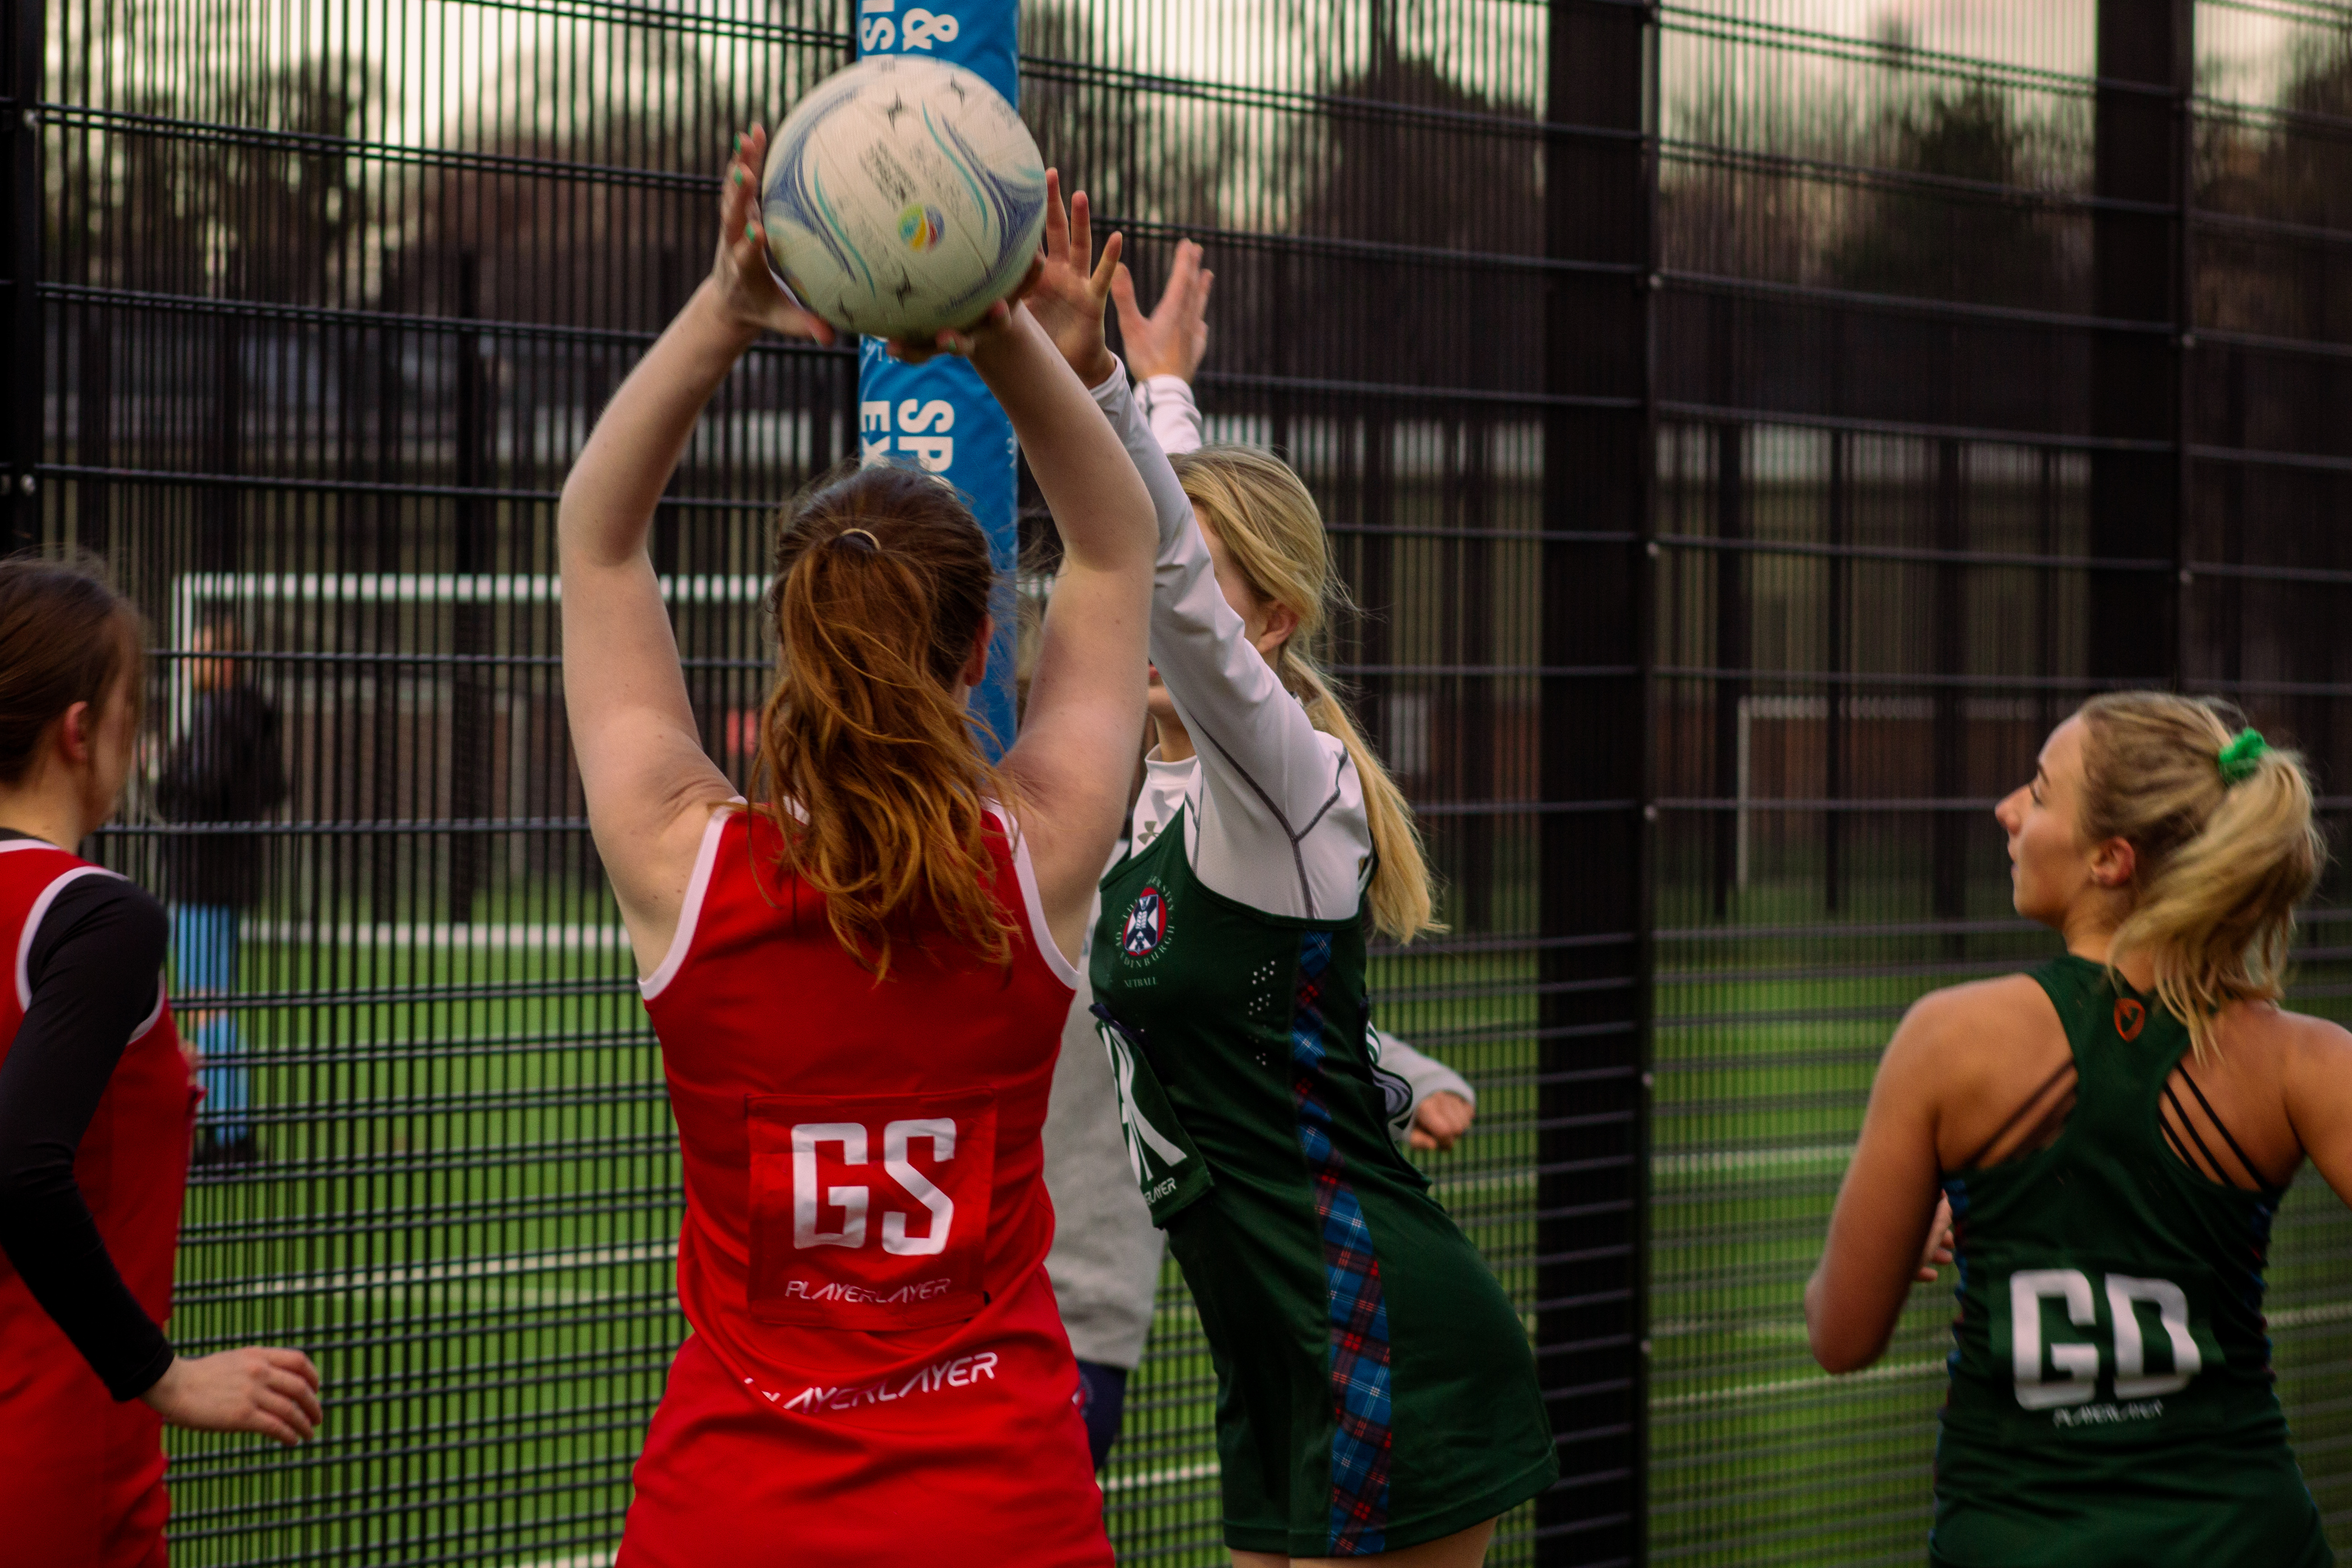 Netball players playing on an outdoor court.